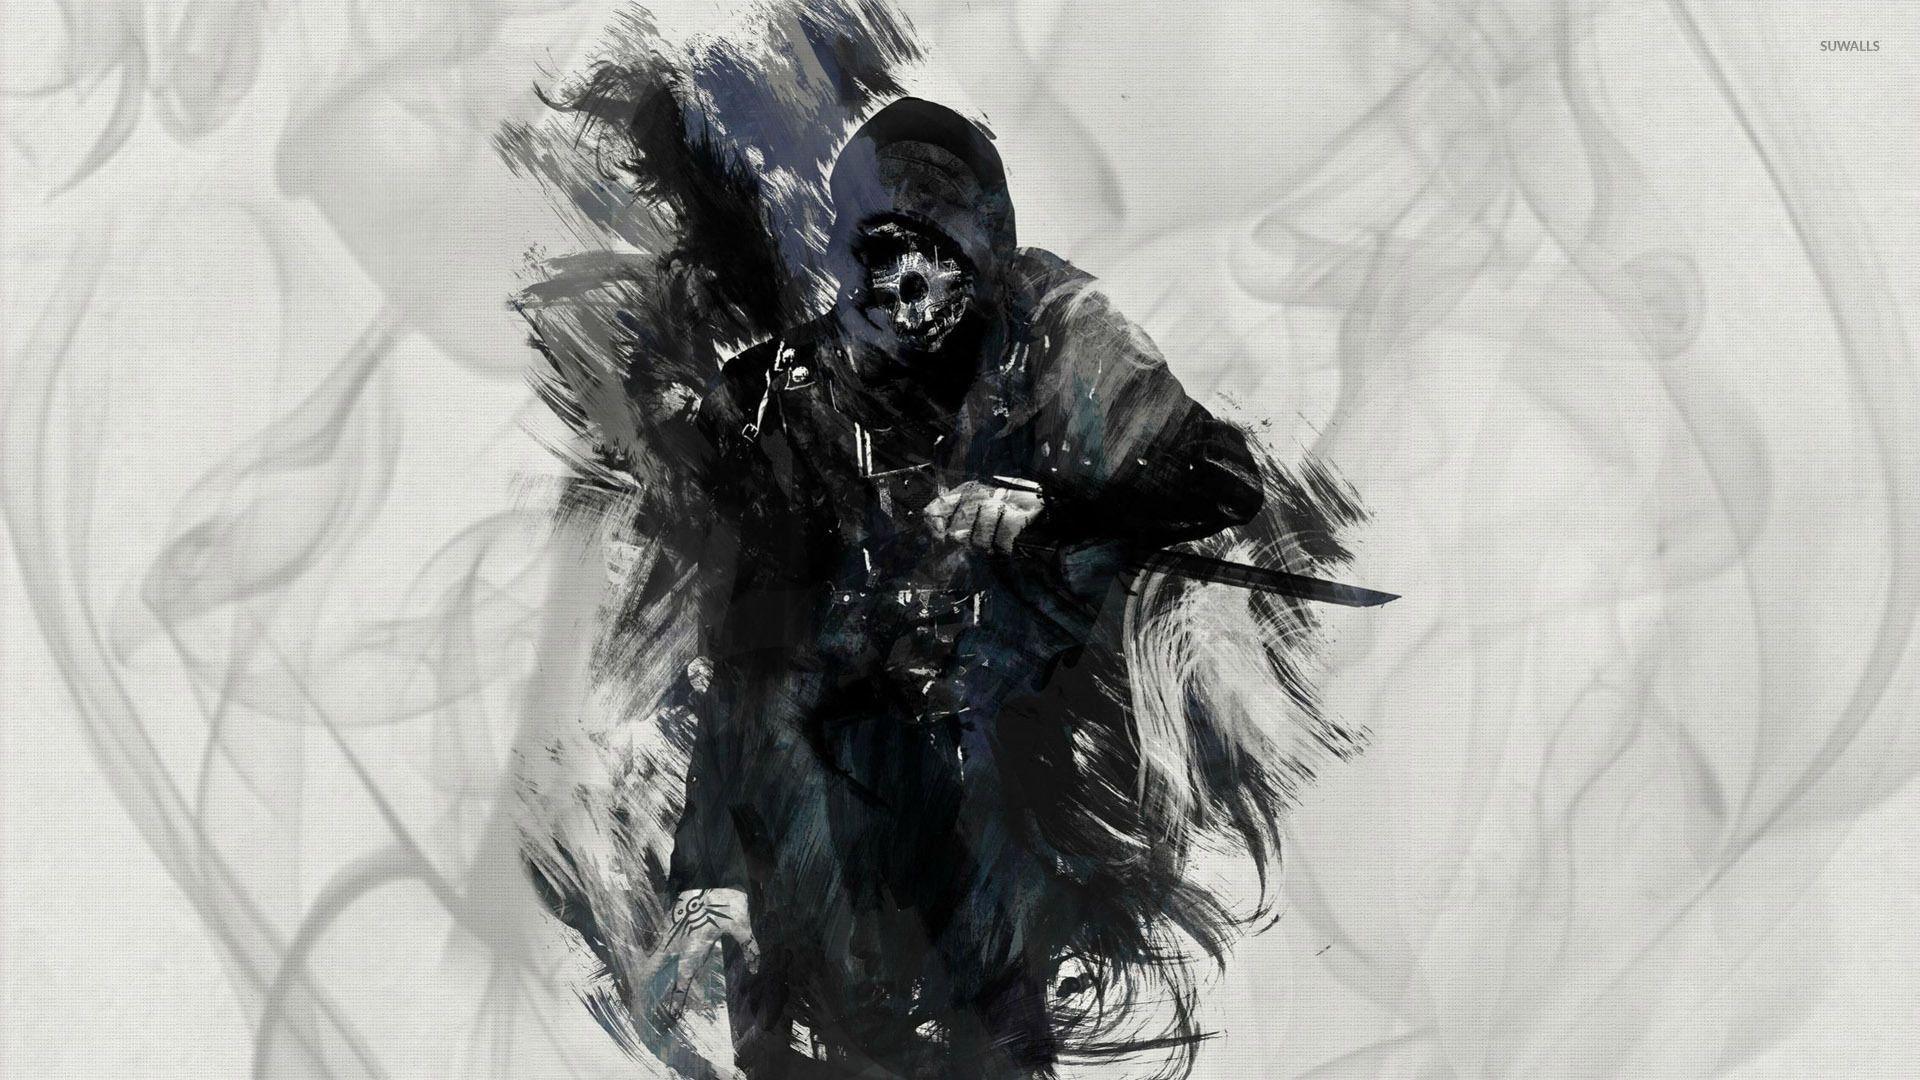 Dishonored wallpaper